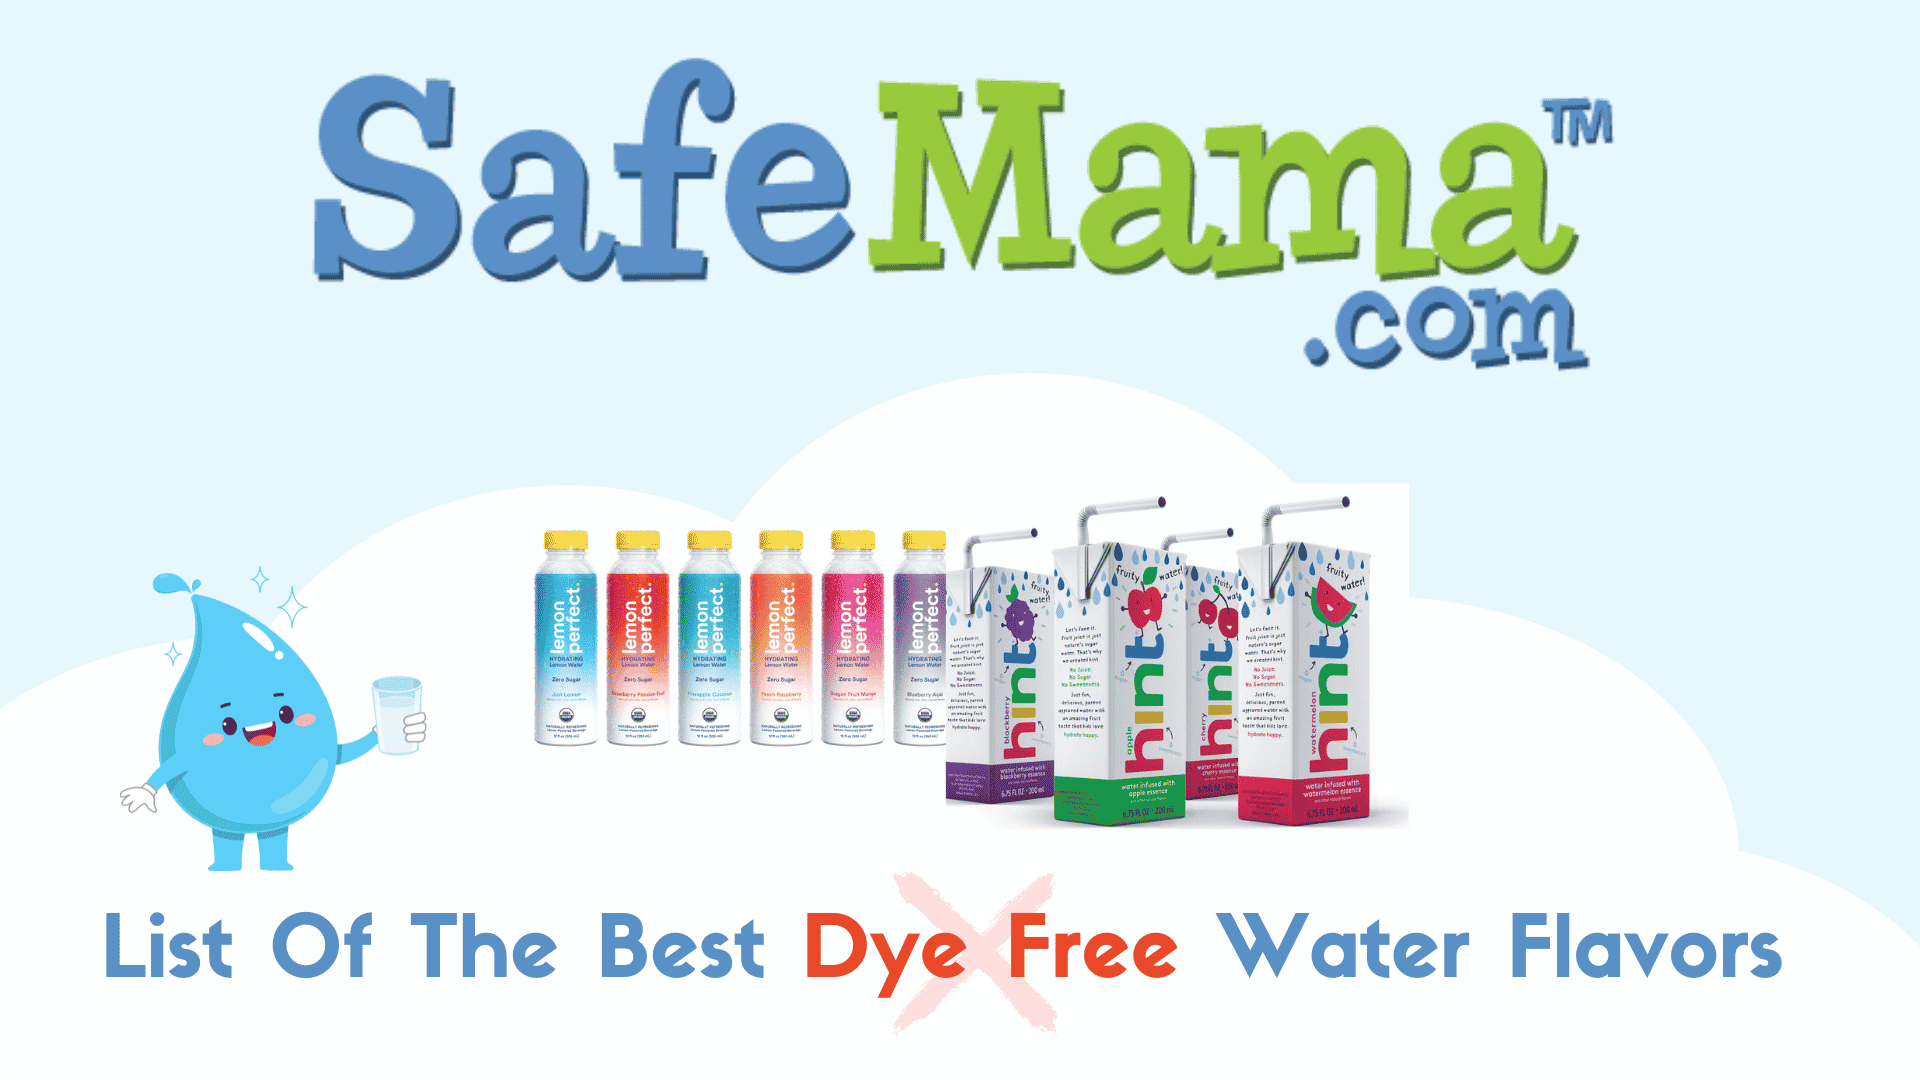 List of the Best Dye-Free Water Flavors